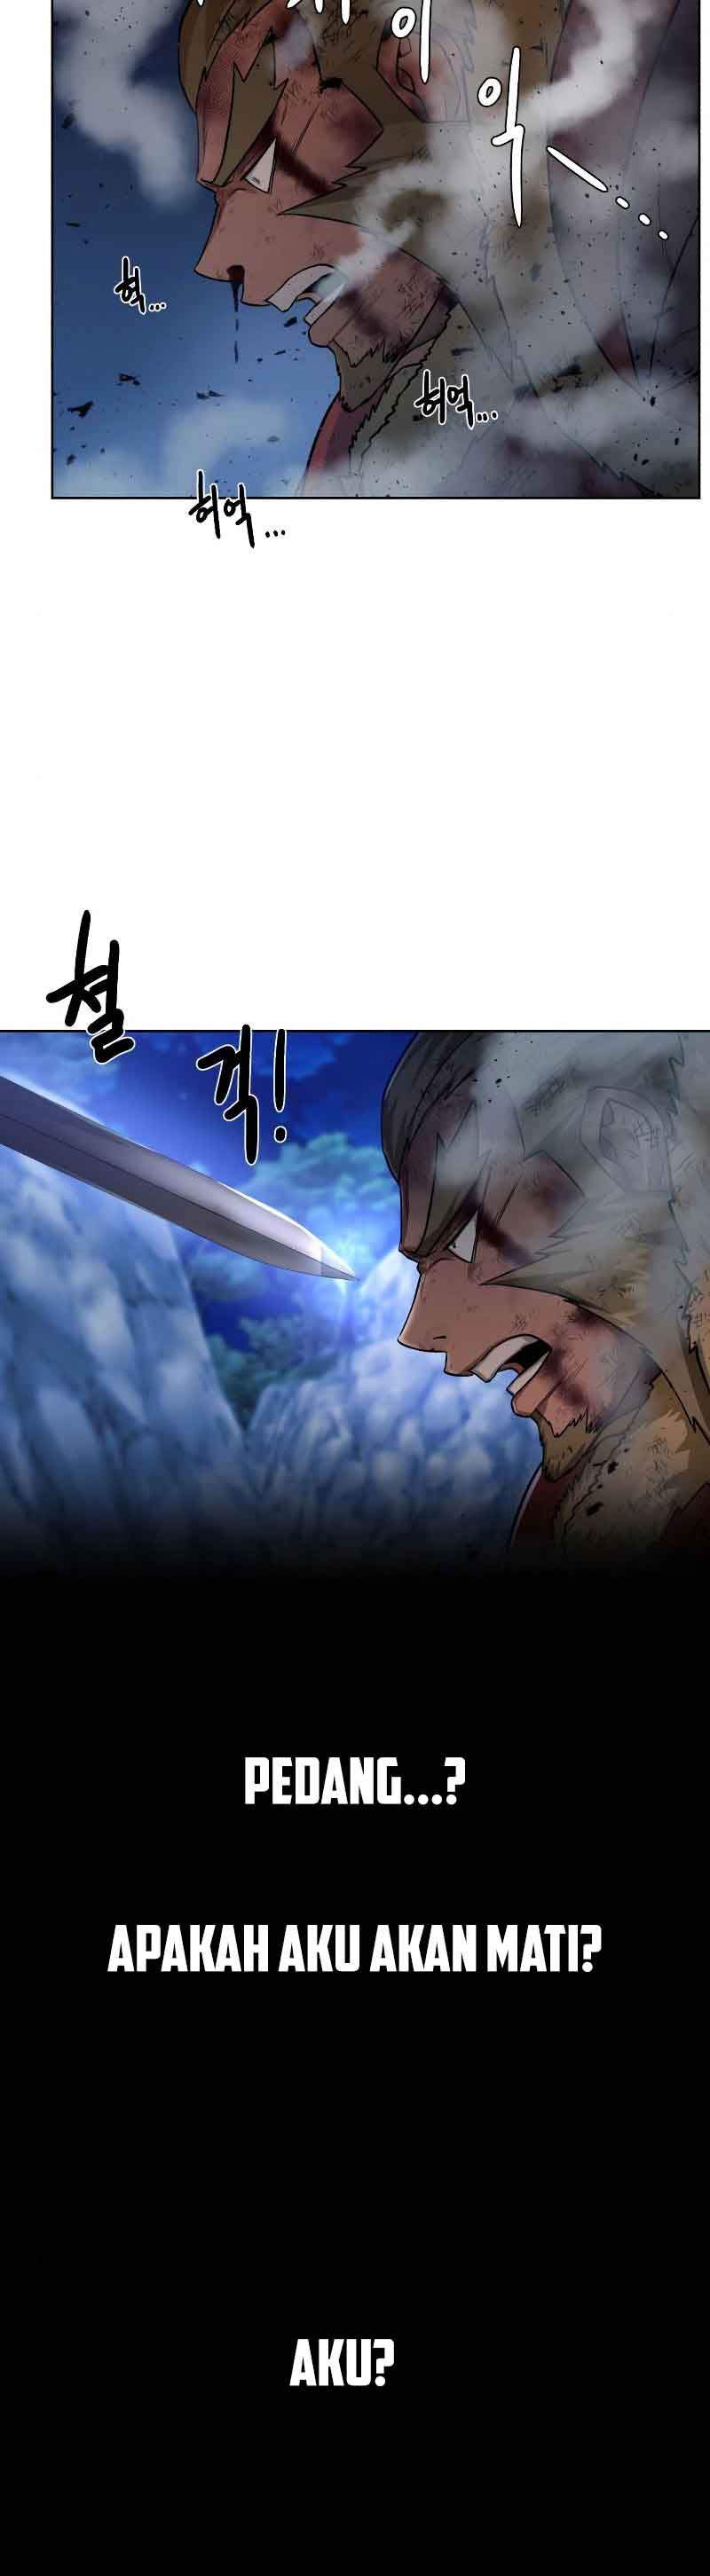 Dungeon and Artifact Chapter 46